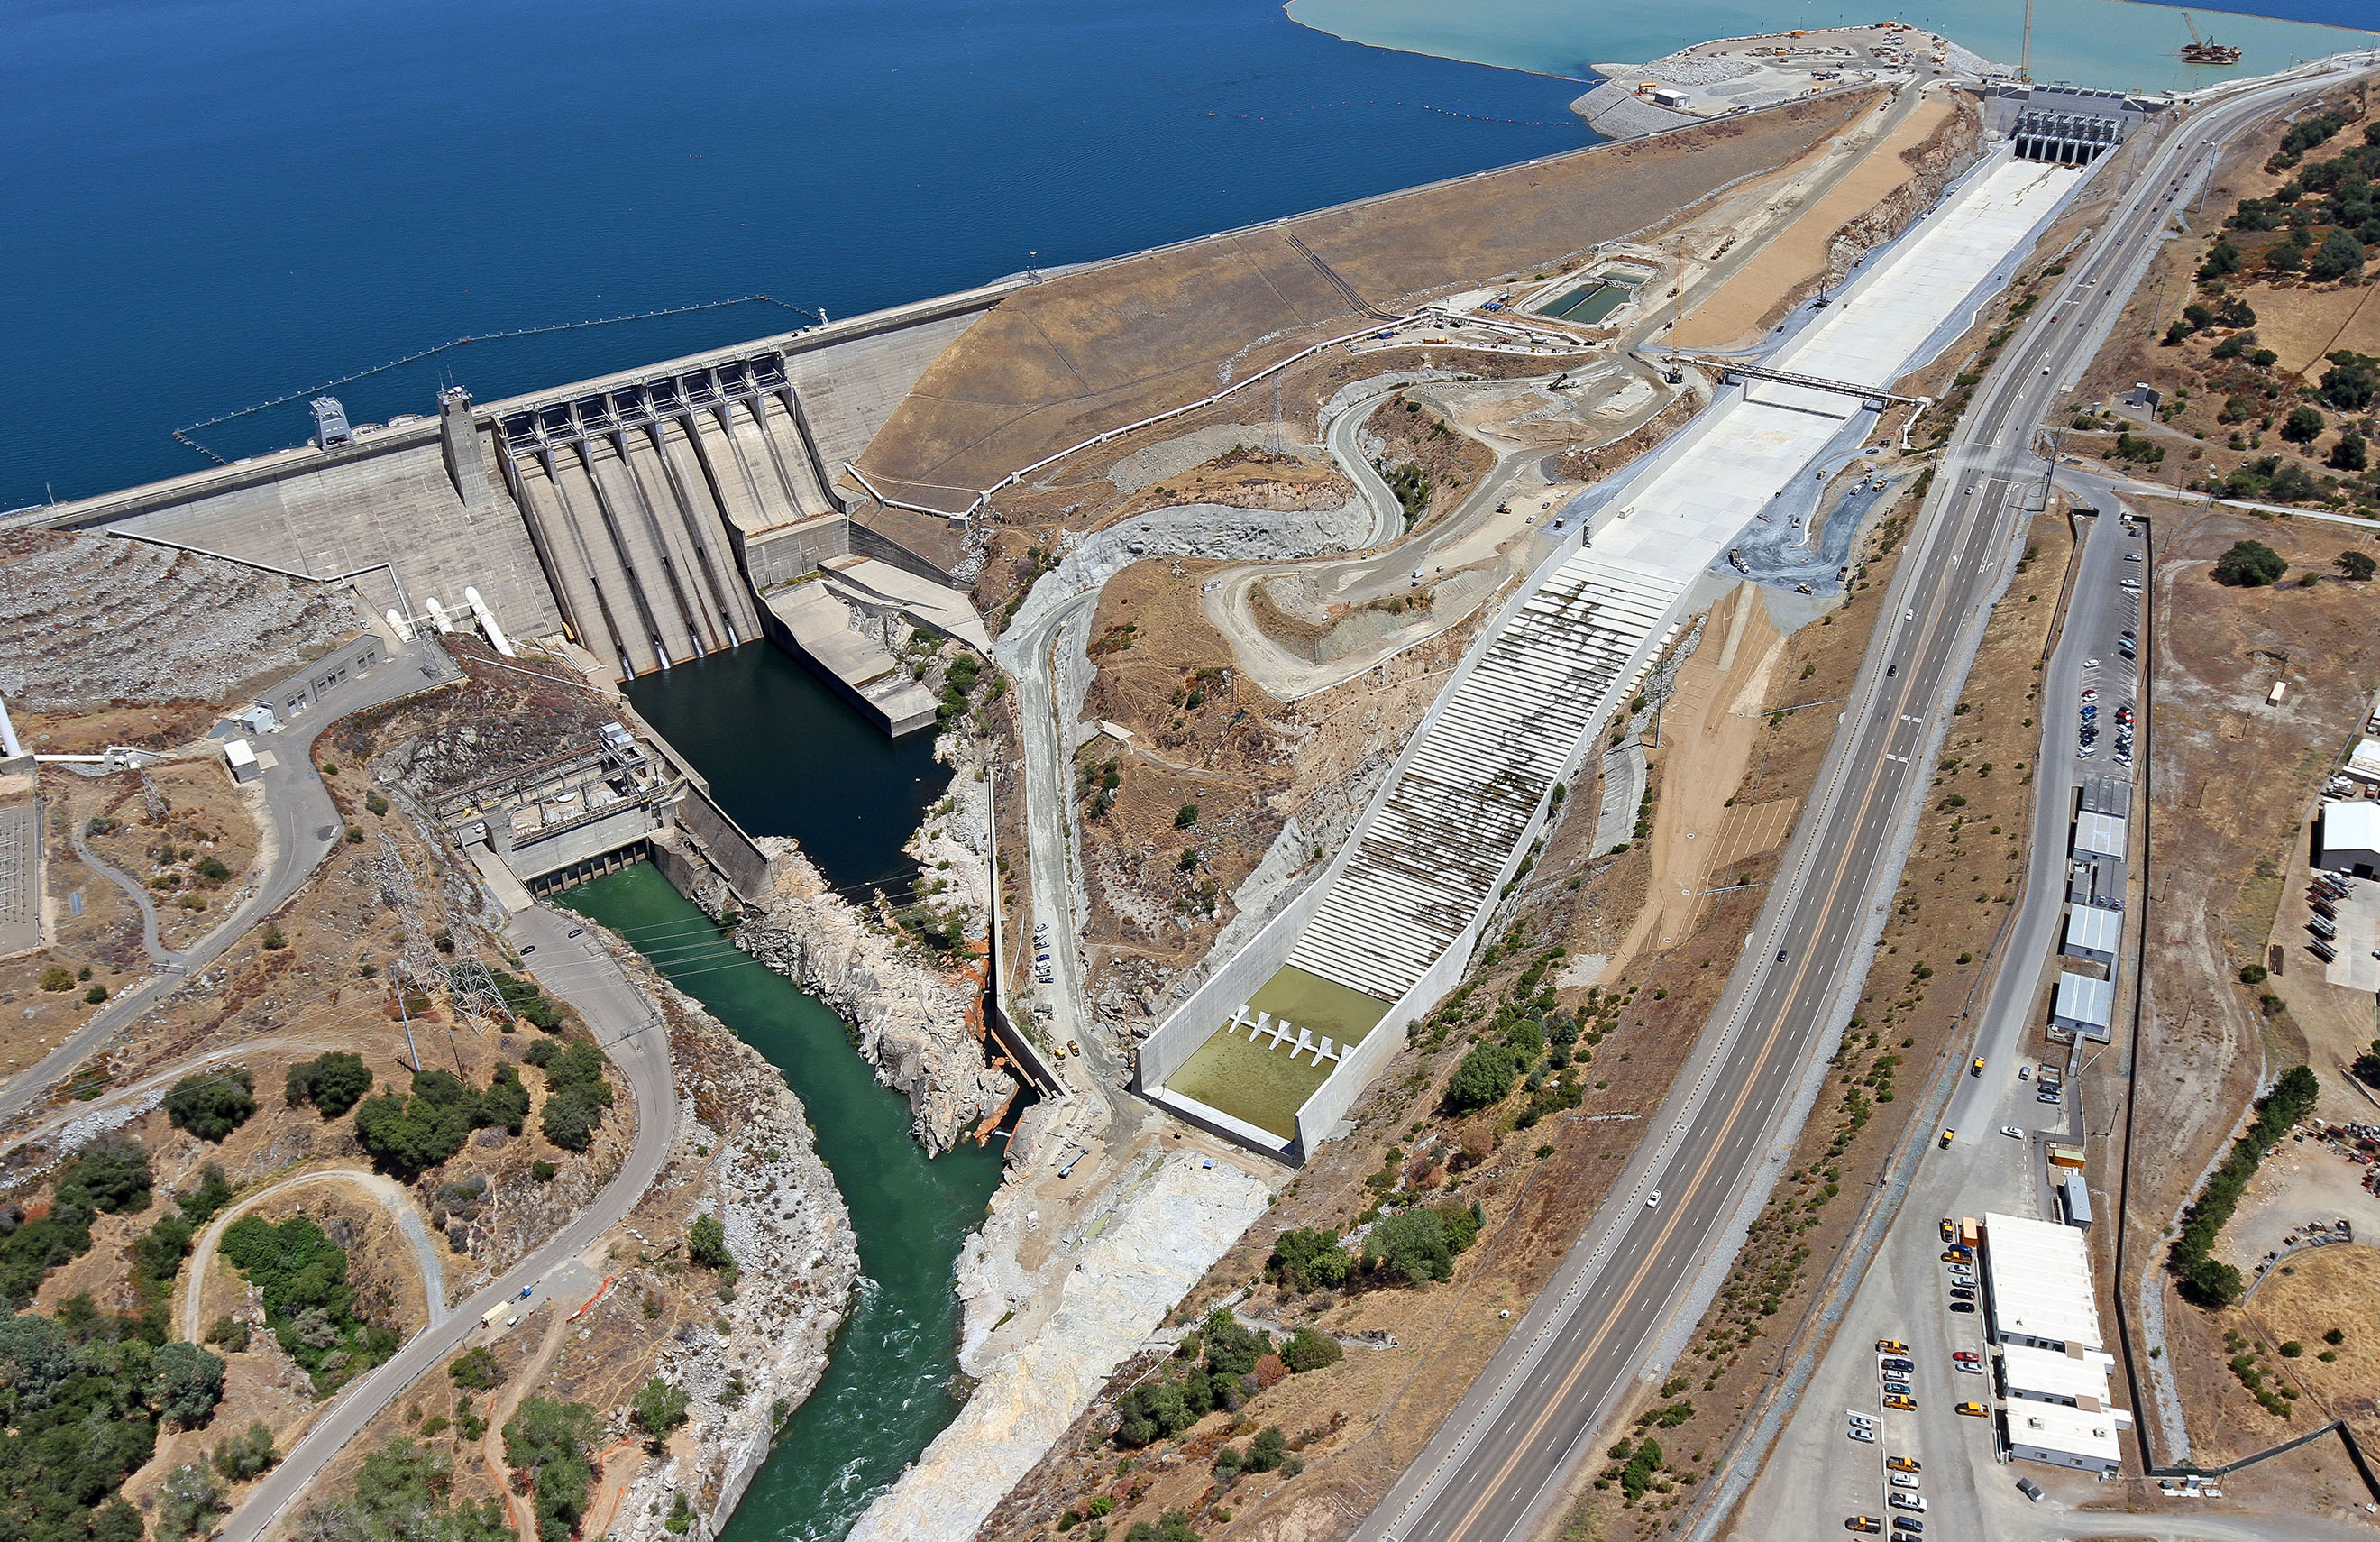 The Folsom Dam Auxiliary Spillway project is an approximately $900-million cooperative effort between the U.S. Army Corps of Engineers and the U.S. Department of the Interior, Bureau of Reclamation.